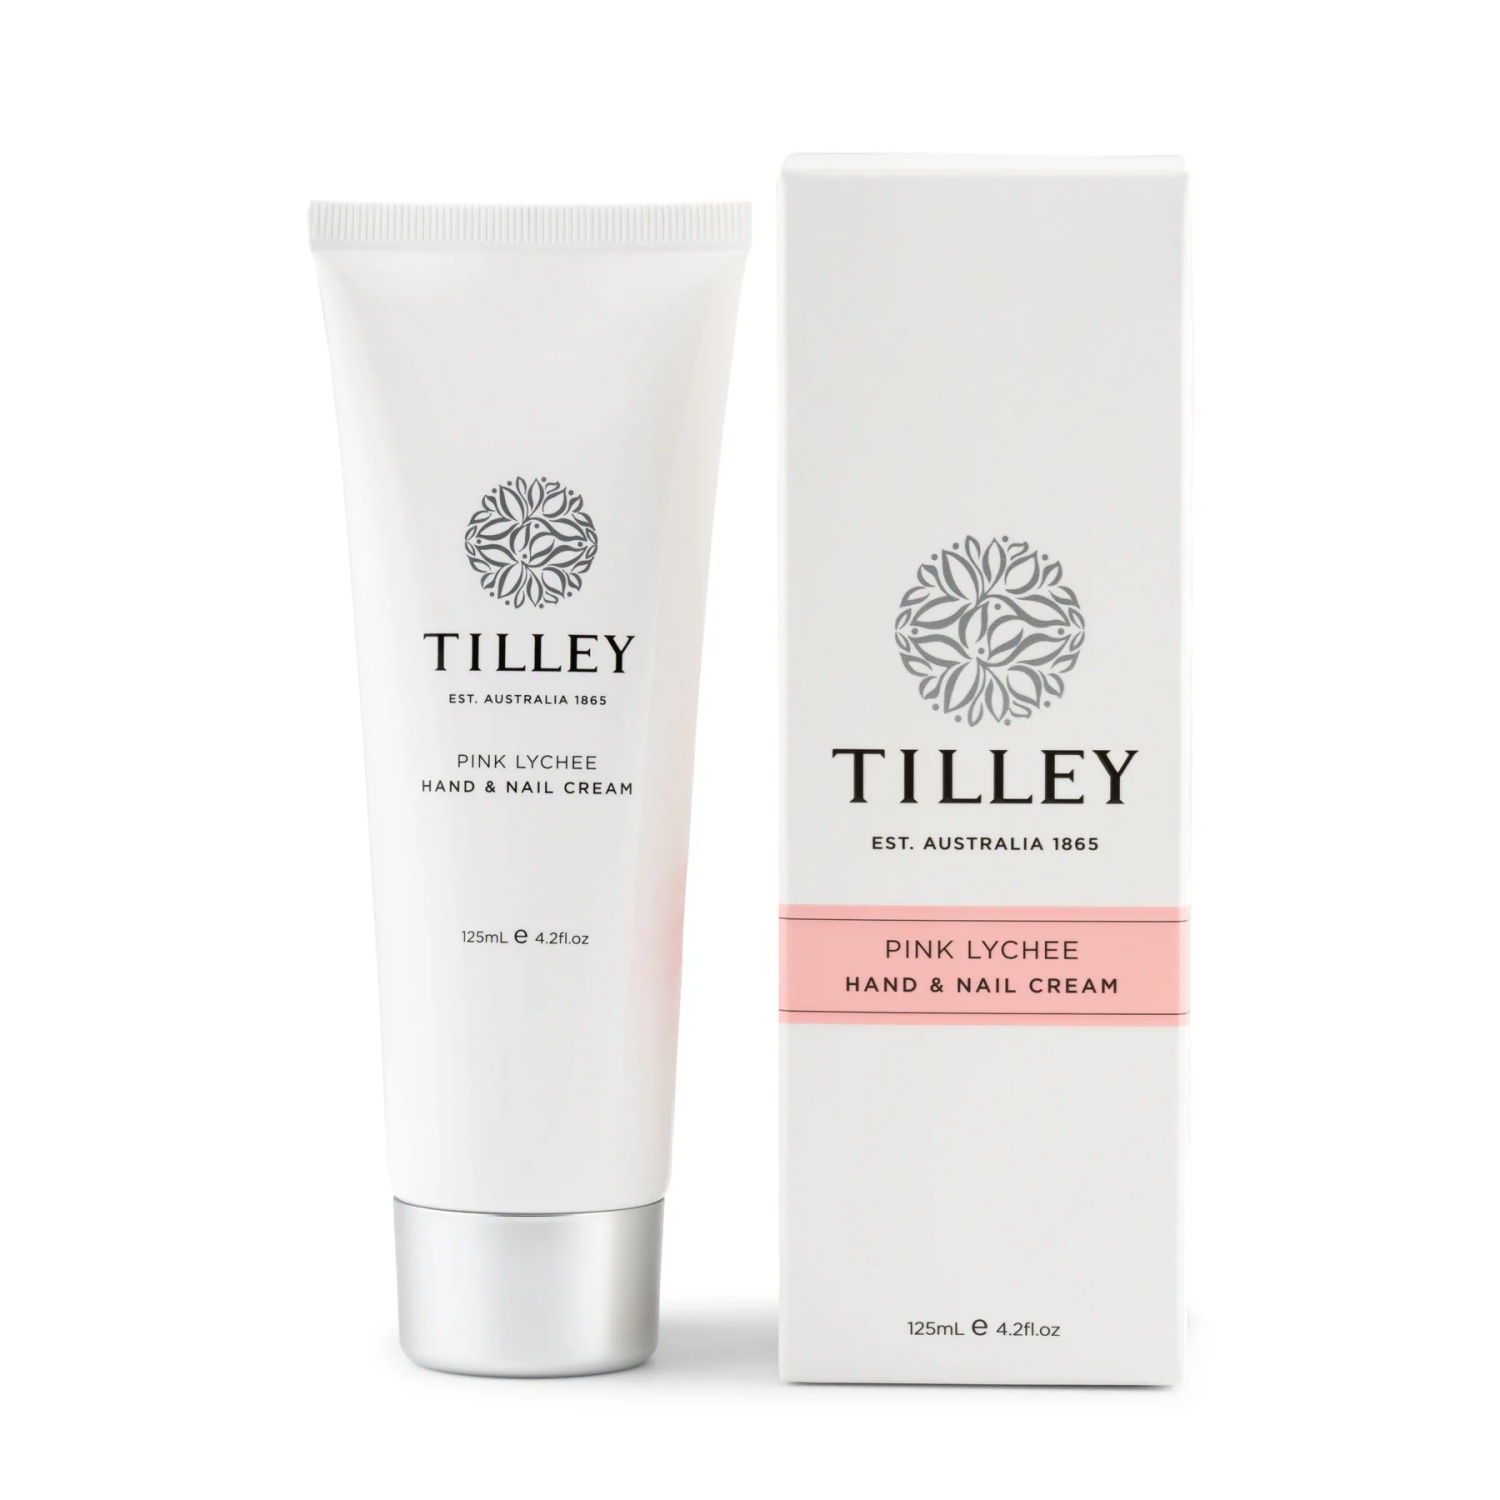 Tilley Classic White Pink Lychee Hand & Nail Cream 125ml